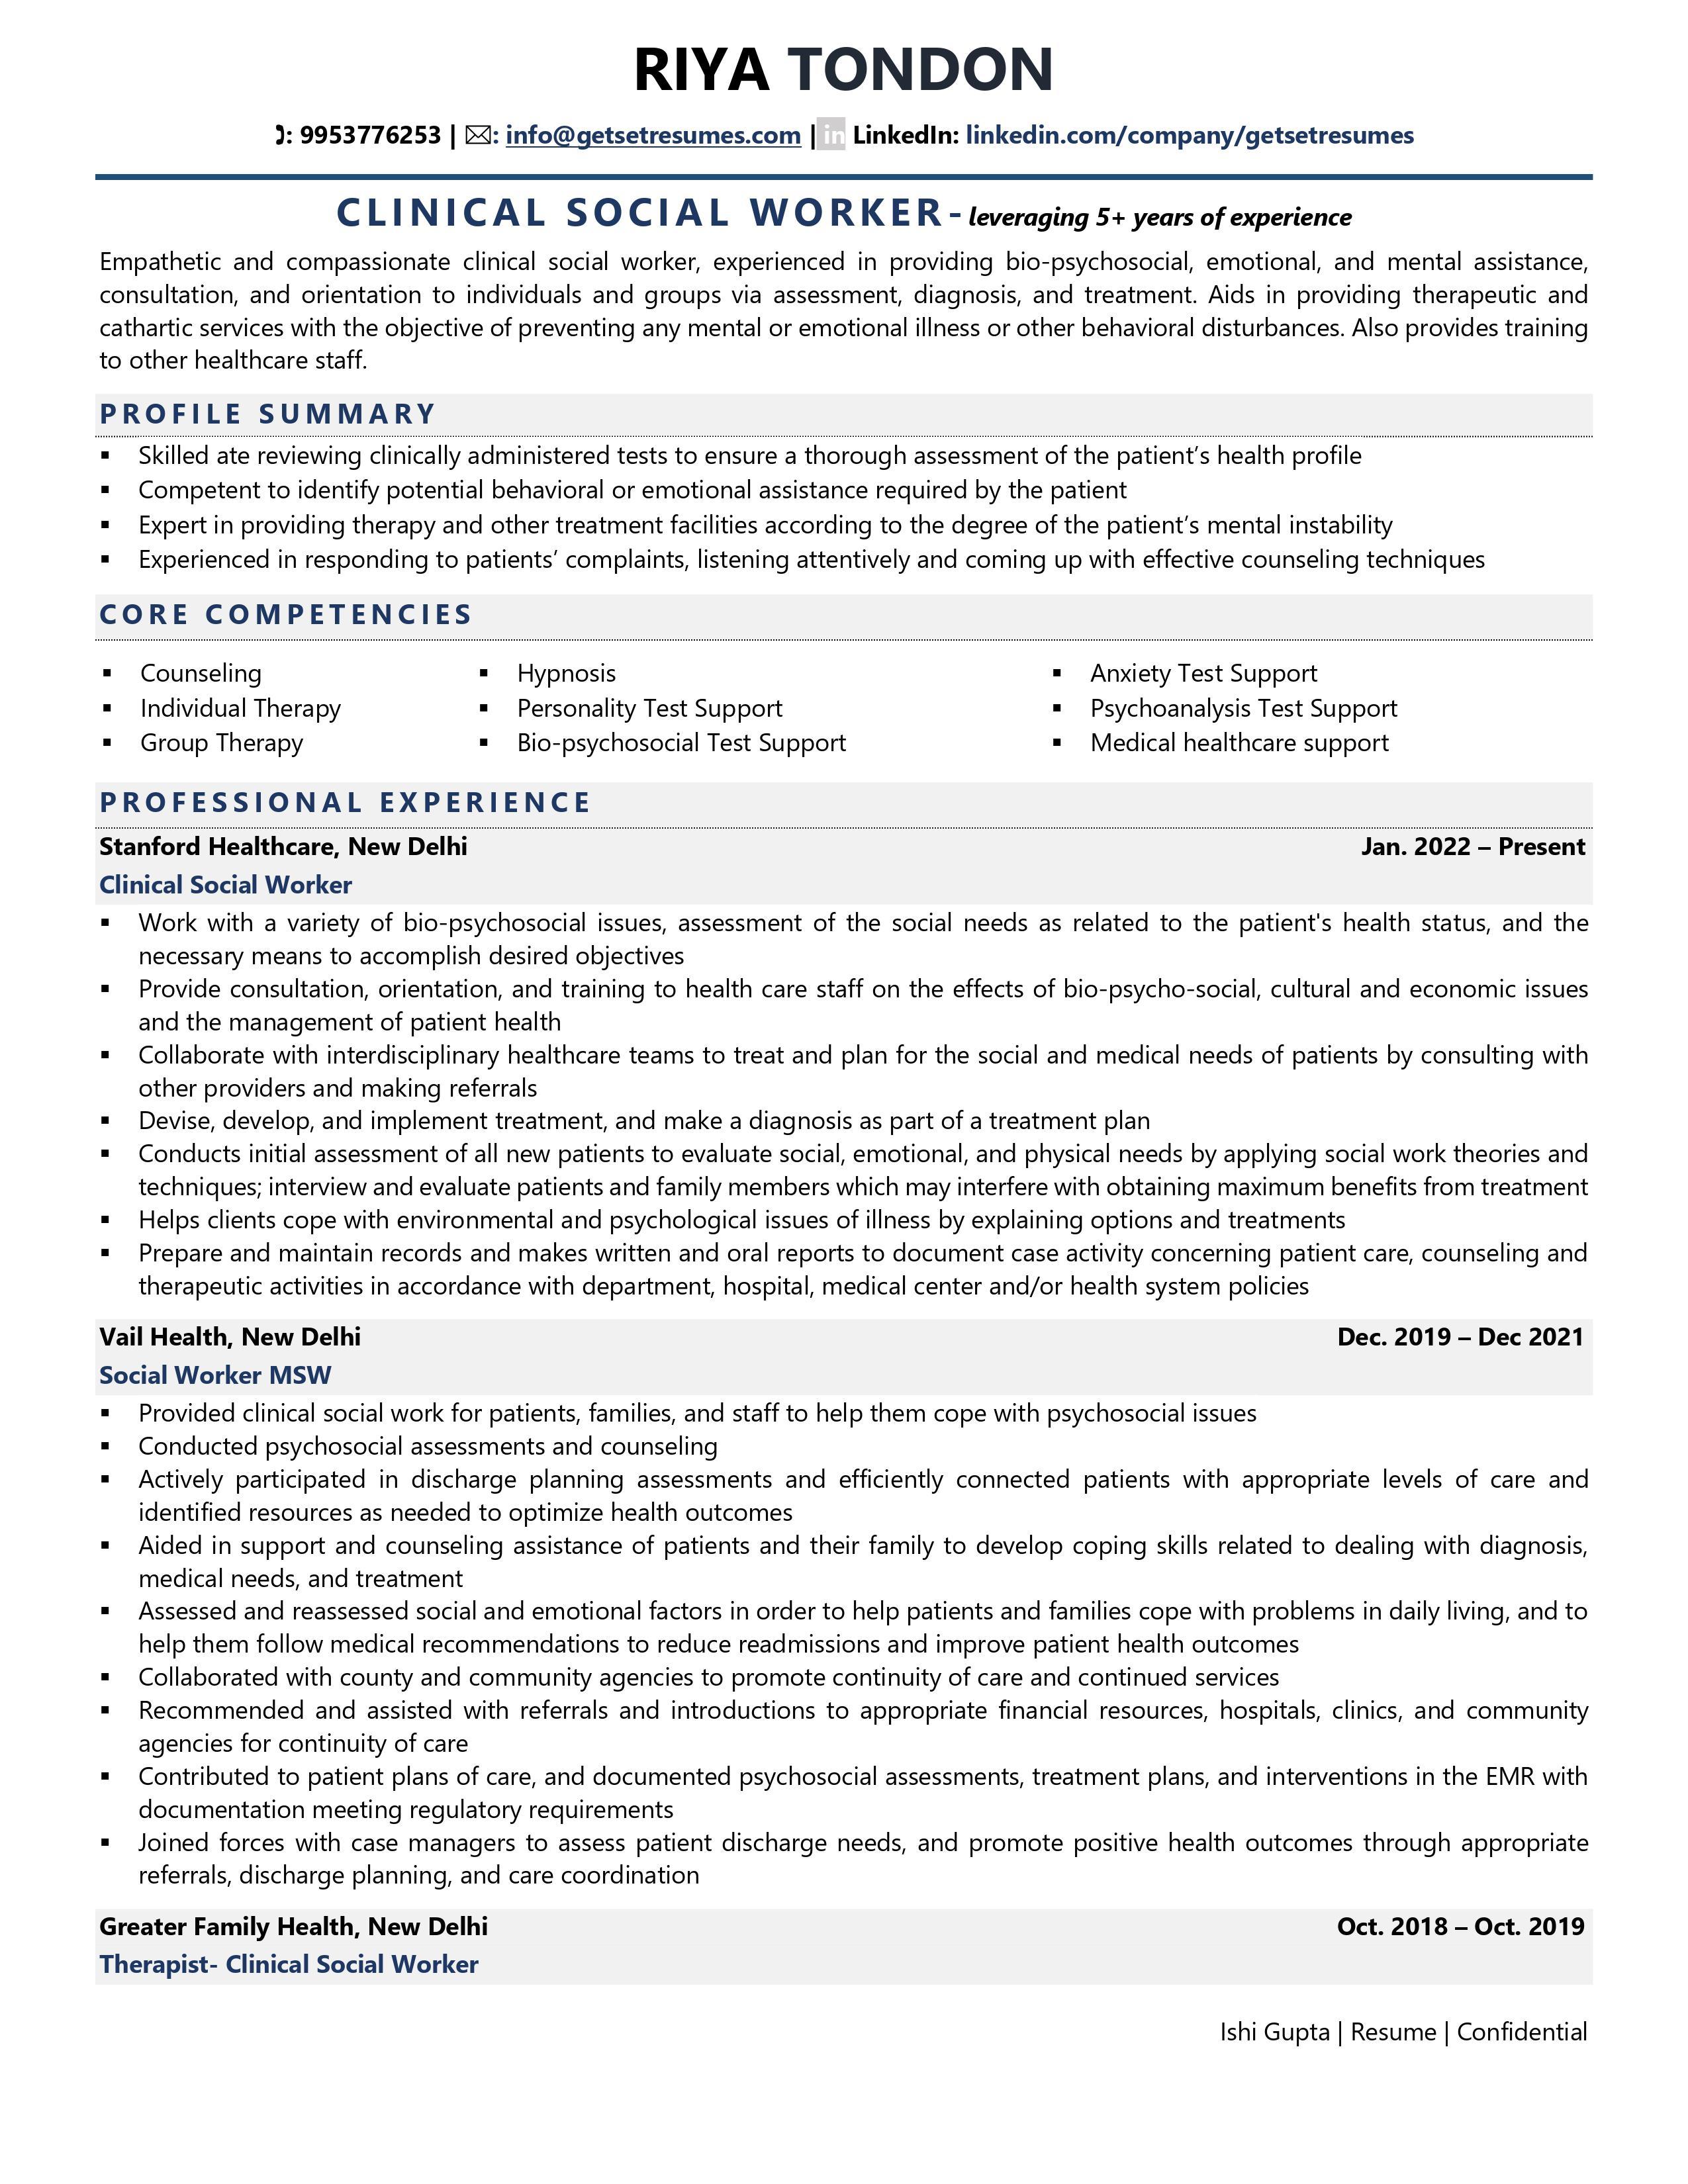 resume objective for social worker